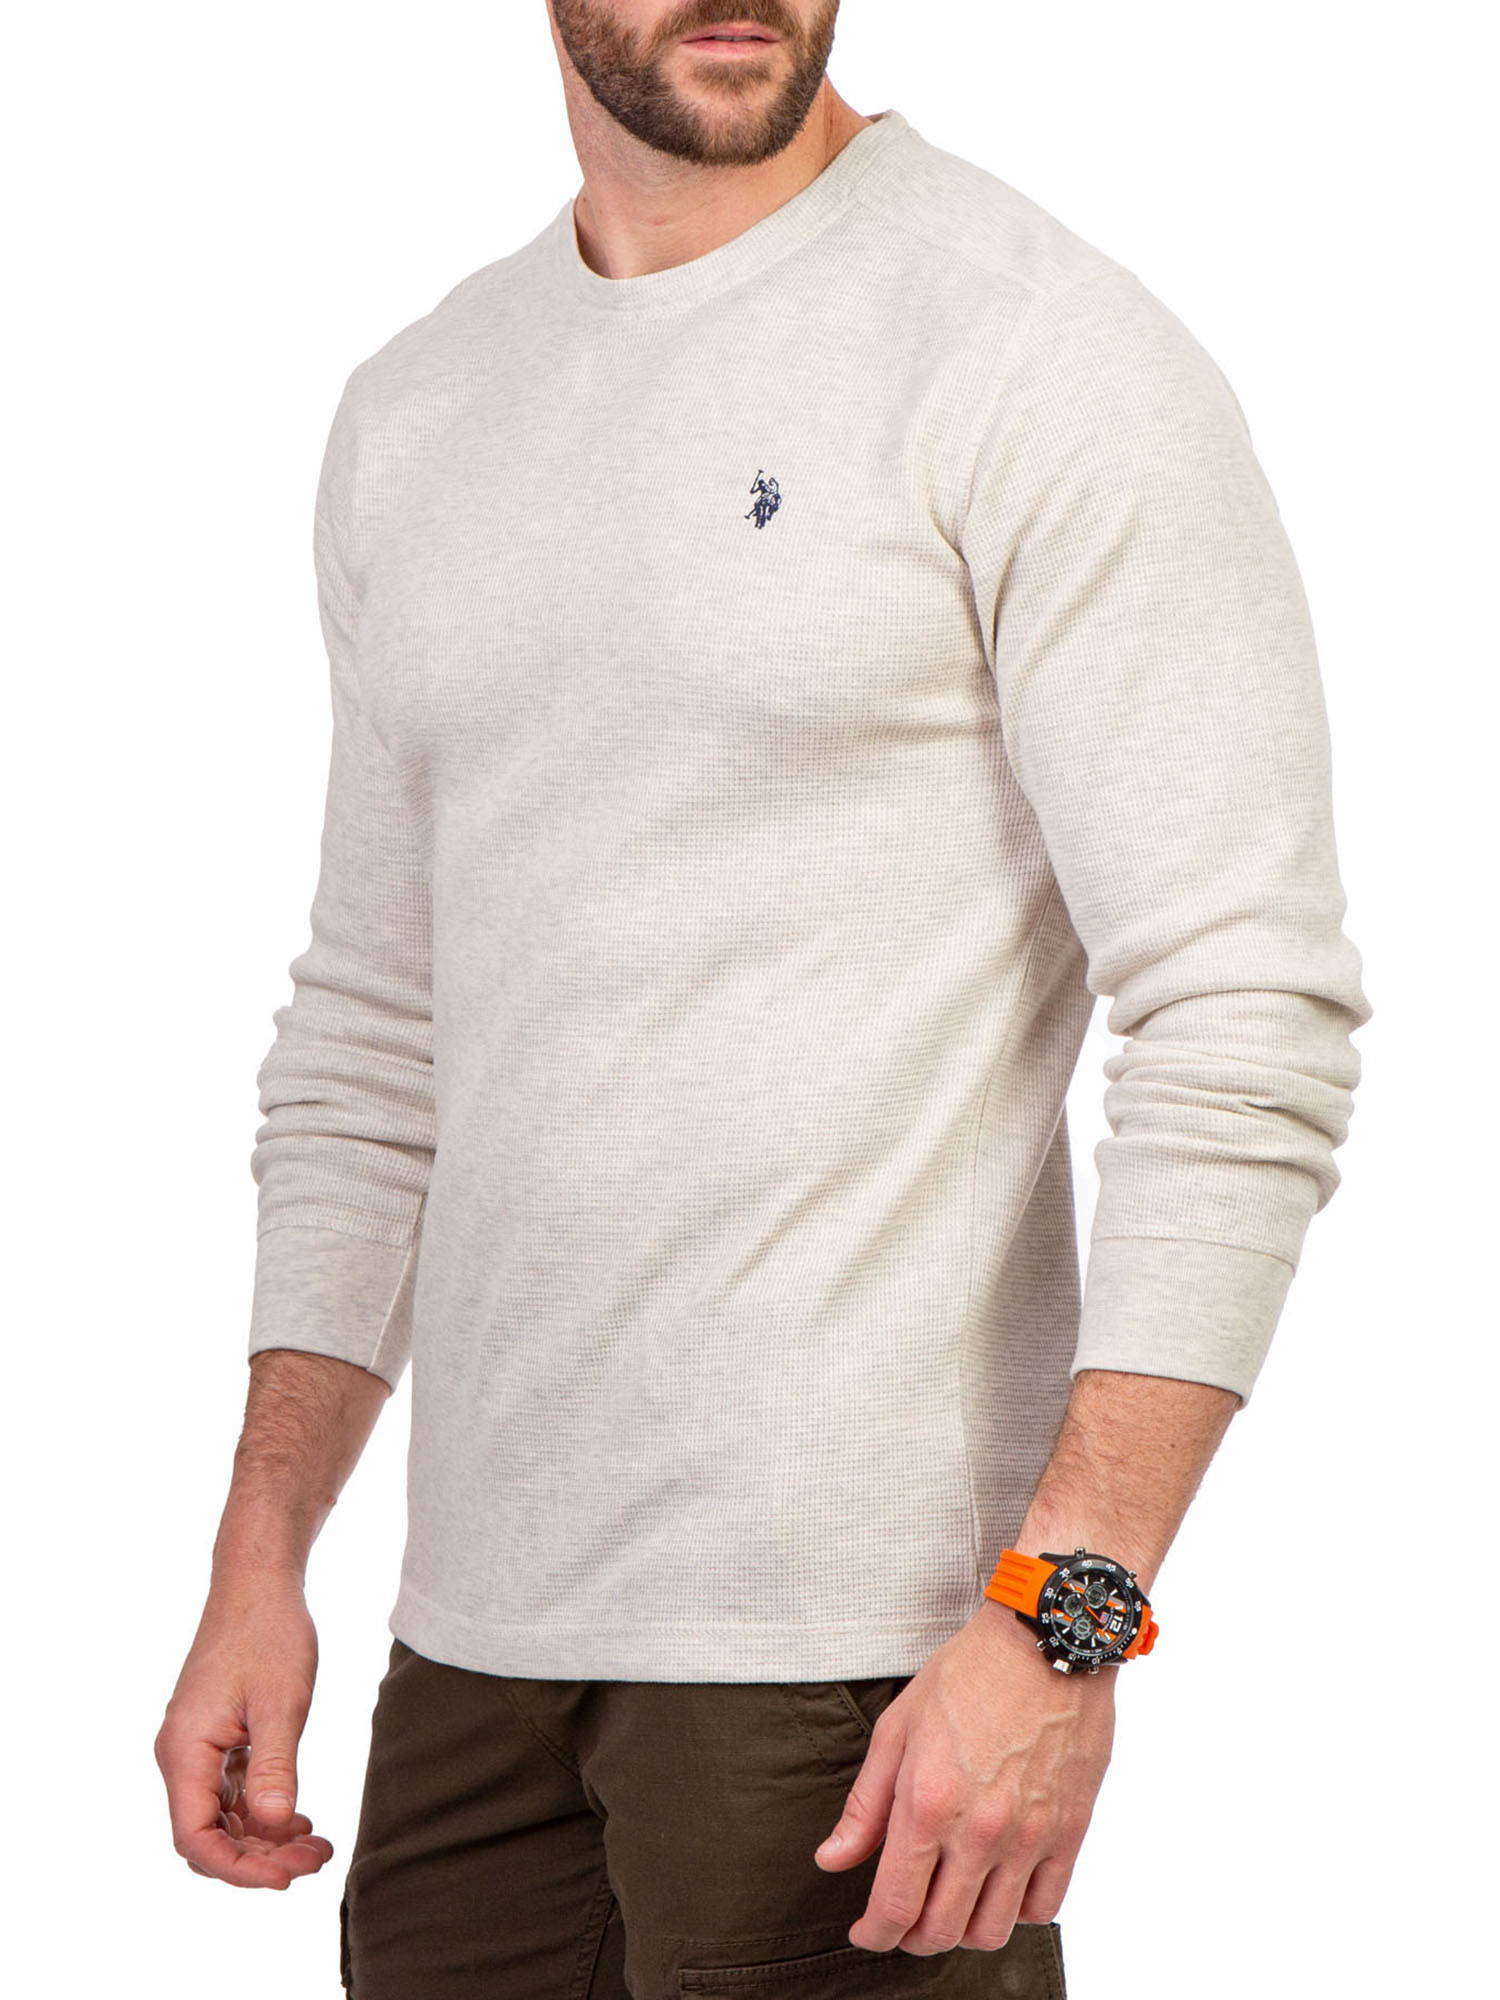 U.S. Polo Assn. Men's Crew Neck Thermal - image 4 of 4